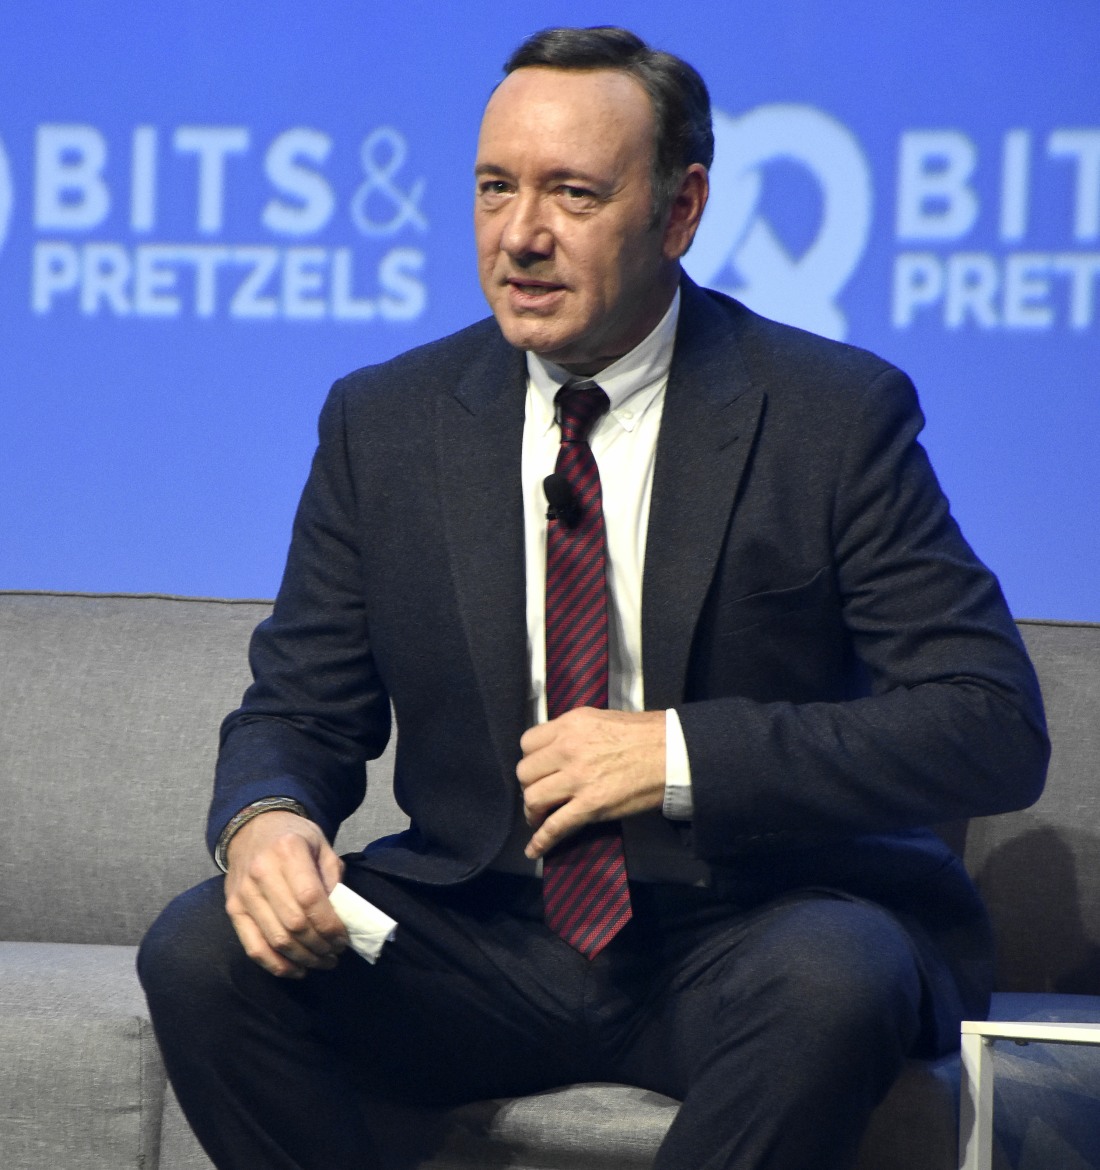 Kevin Spacey speaks at the Founders Festival Bits & Pretzels